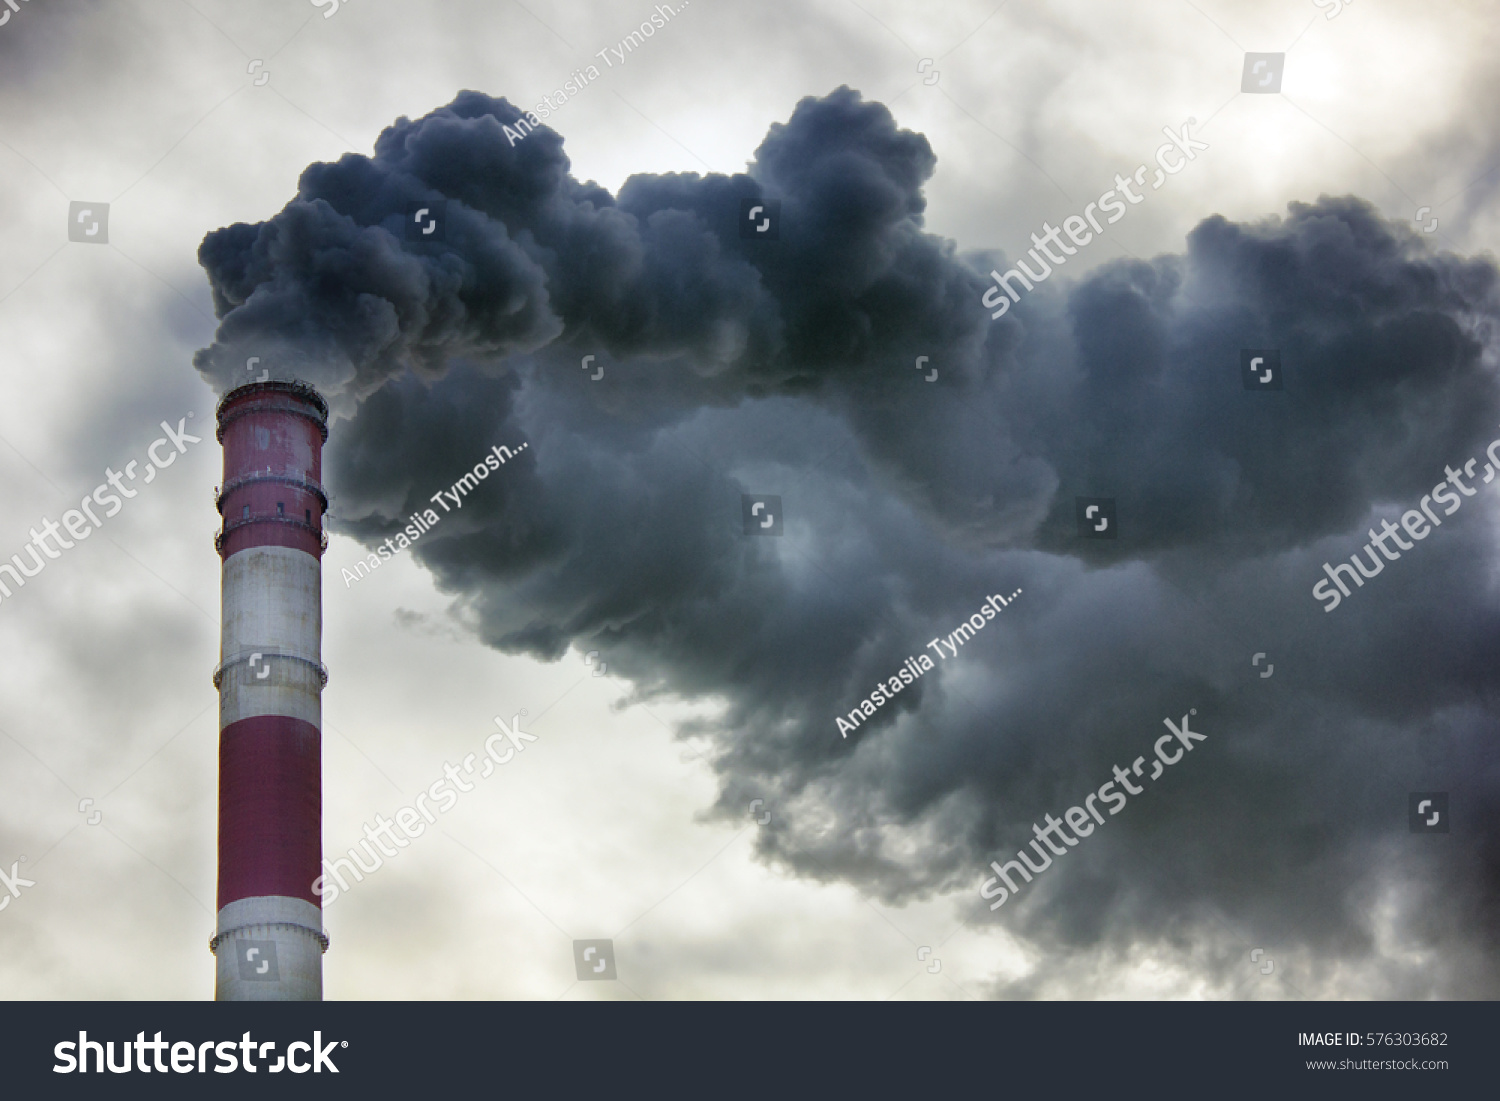 Air pollution, closeup of one big smoking pipe #576303682